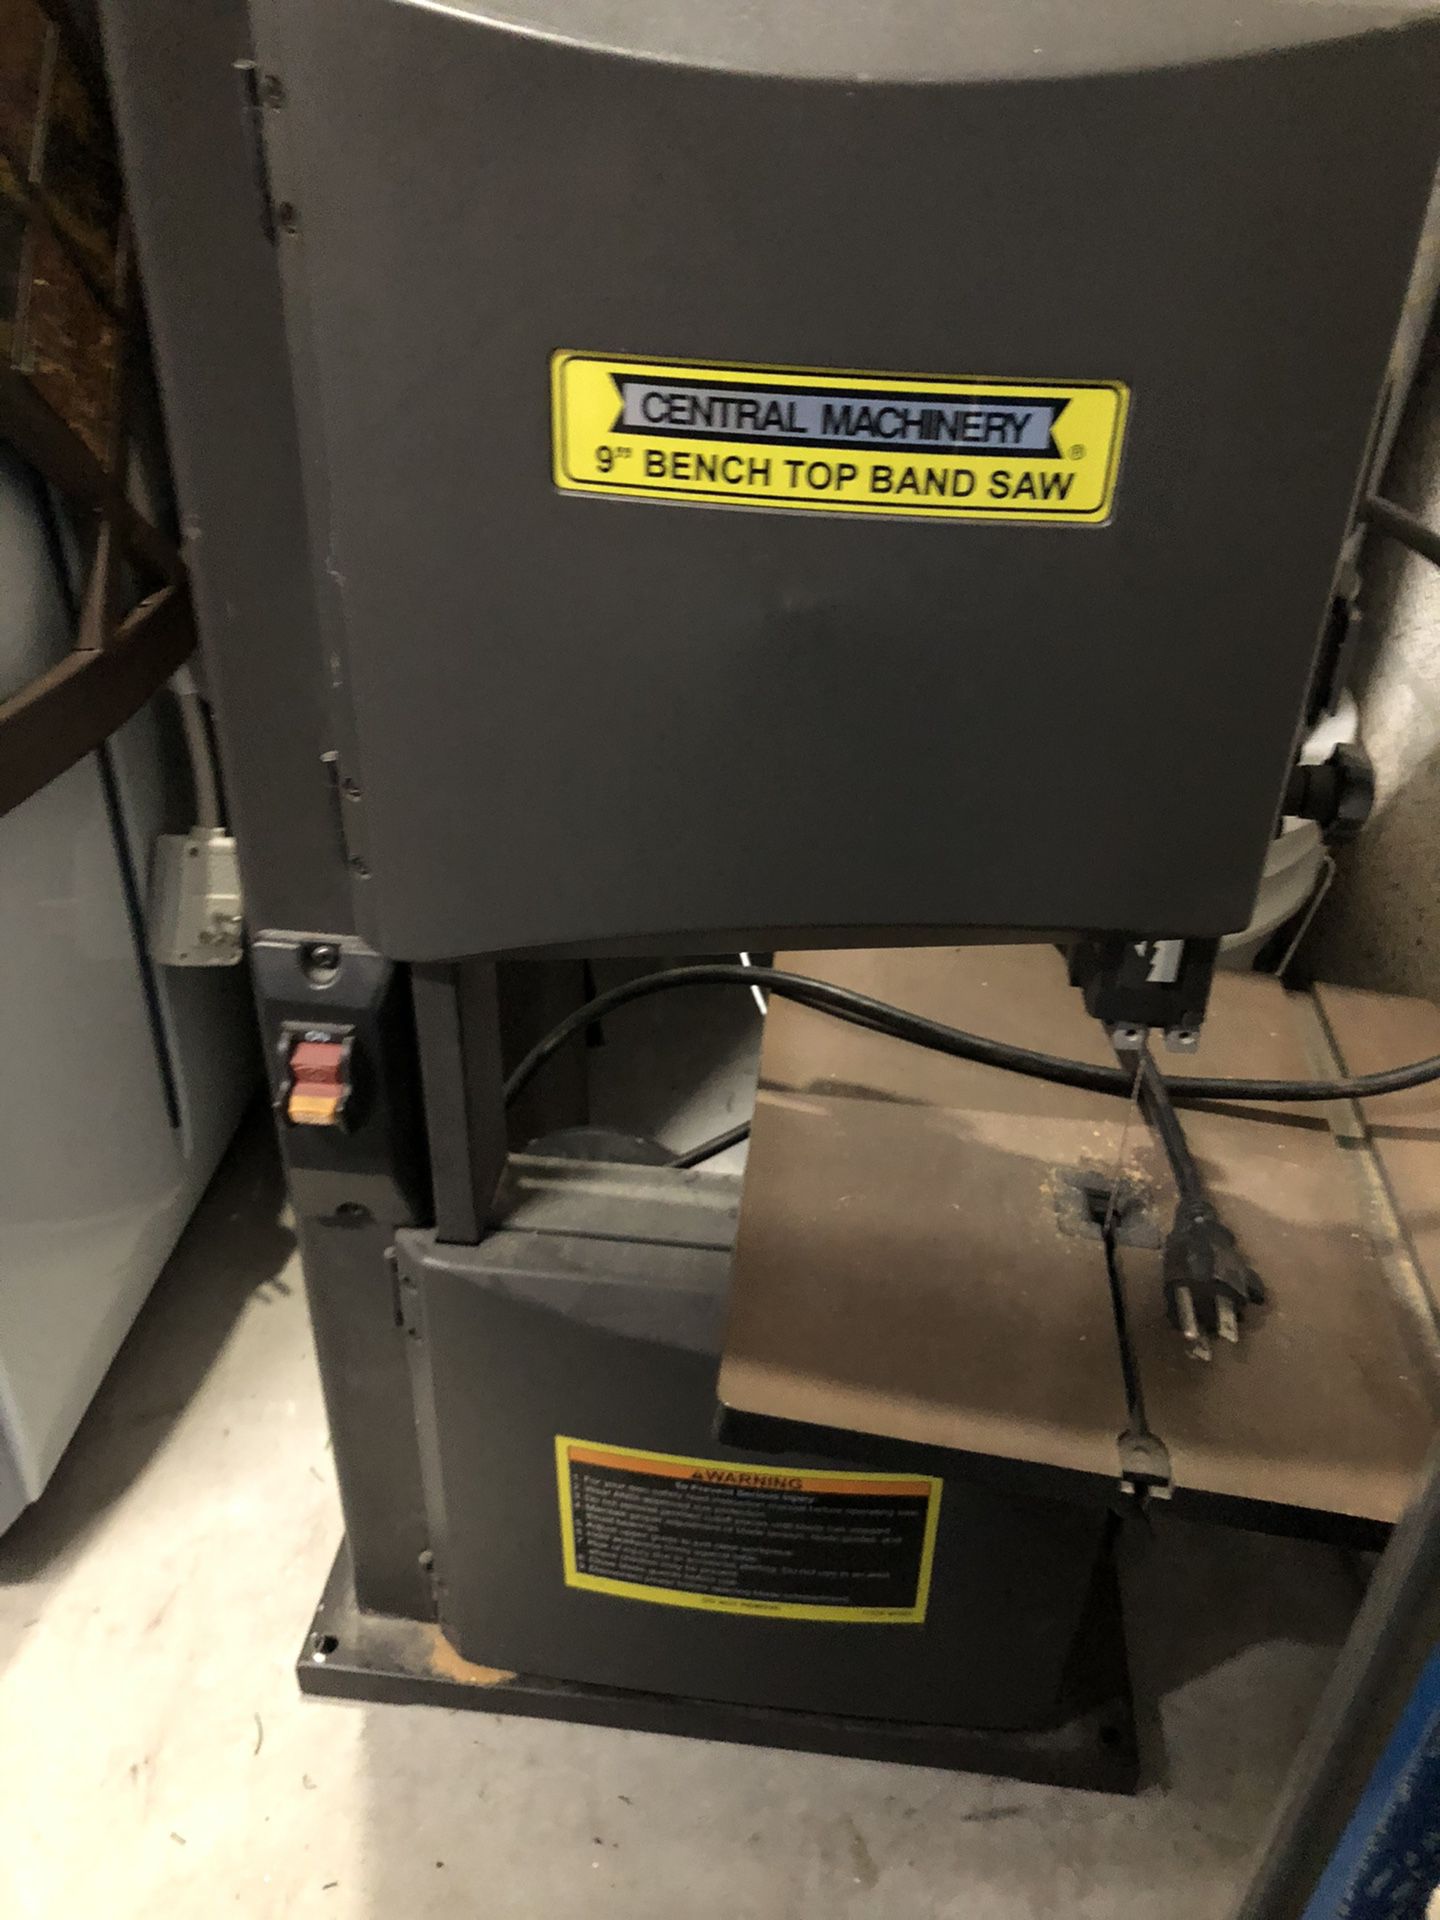 9” Bench Top Band Saw electrical